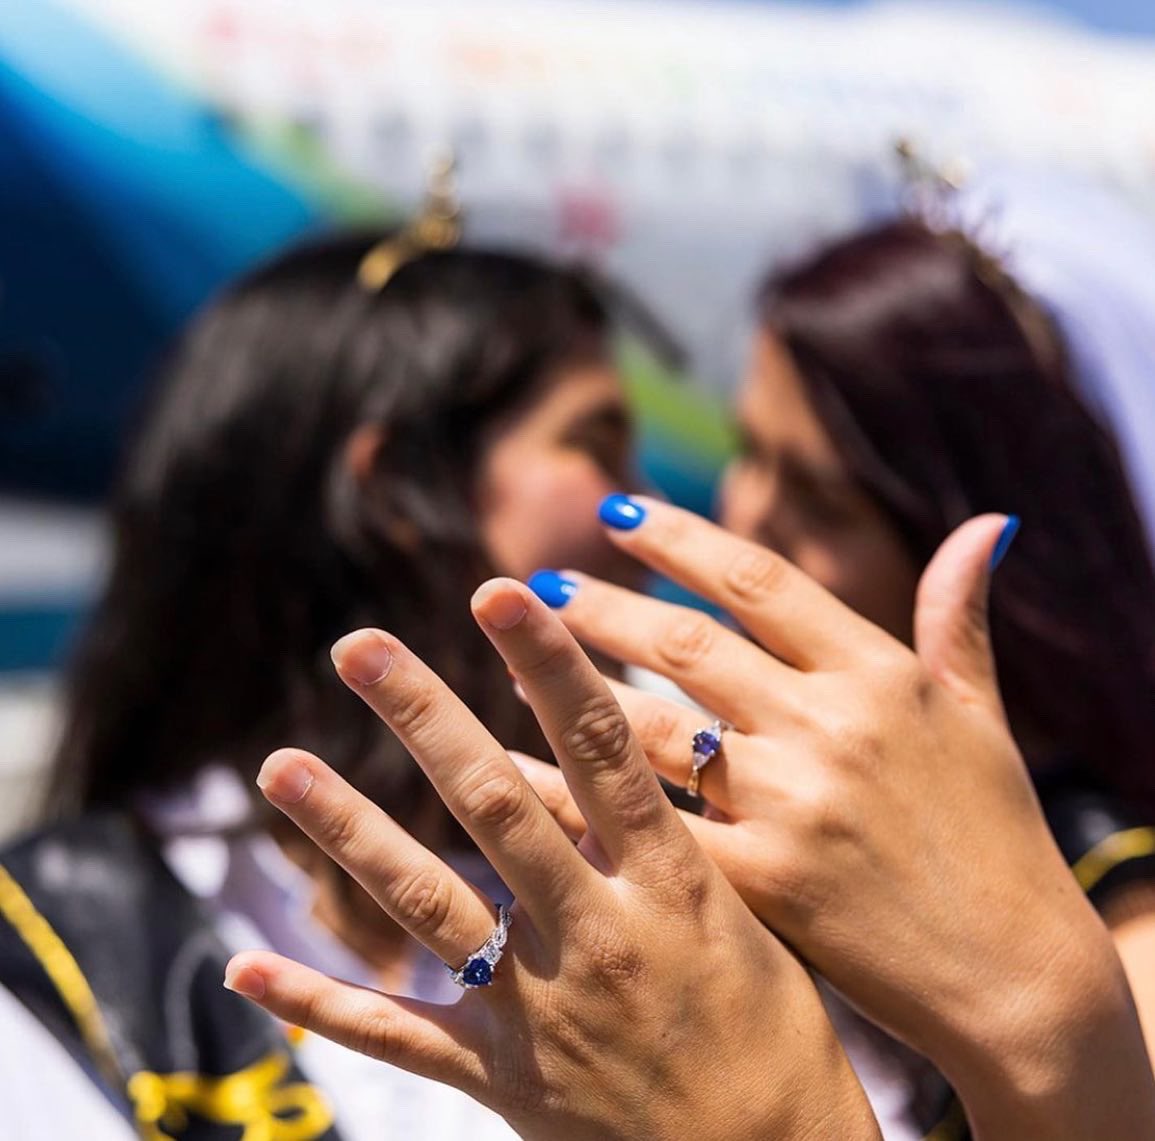 Love is in the Air (literally)! 🏳️‍🌈Congrats to these two Alaska Airline’s employees who got engaged after meeting two years ago on another AlaskAirlines flight! 👭 📷: Ingrid Barrentine

#PopCulture #News #IGDaily #CelebStyle #HSMNews #lgbt #lgbtq #pride #loveislove